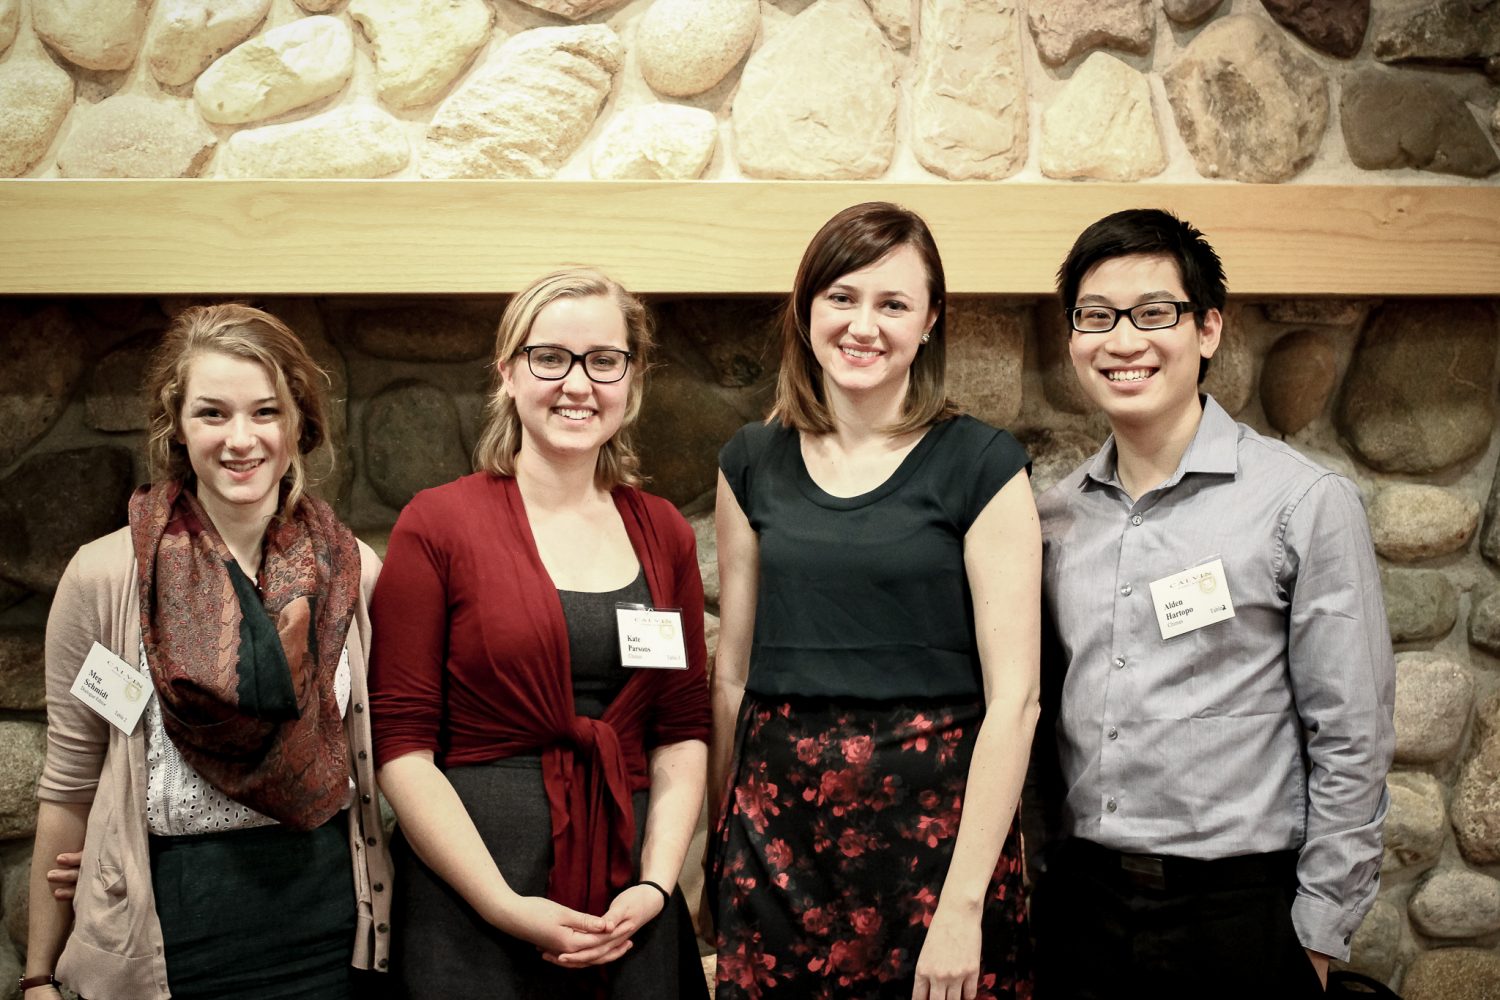 Chimes and Dialogue staff met Beaty at the Young Alumni Awards dinner. Photo courtesy Alden Hartopo.